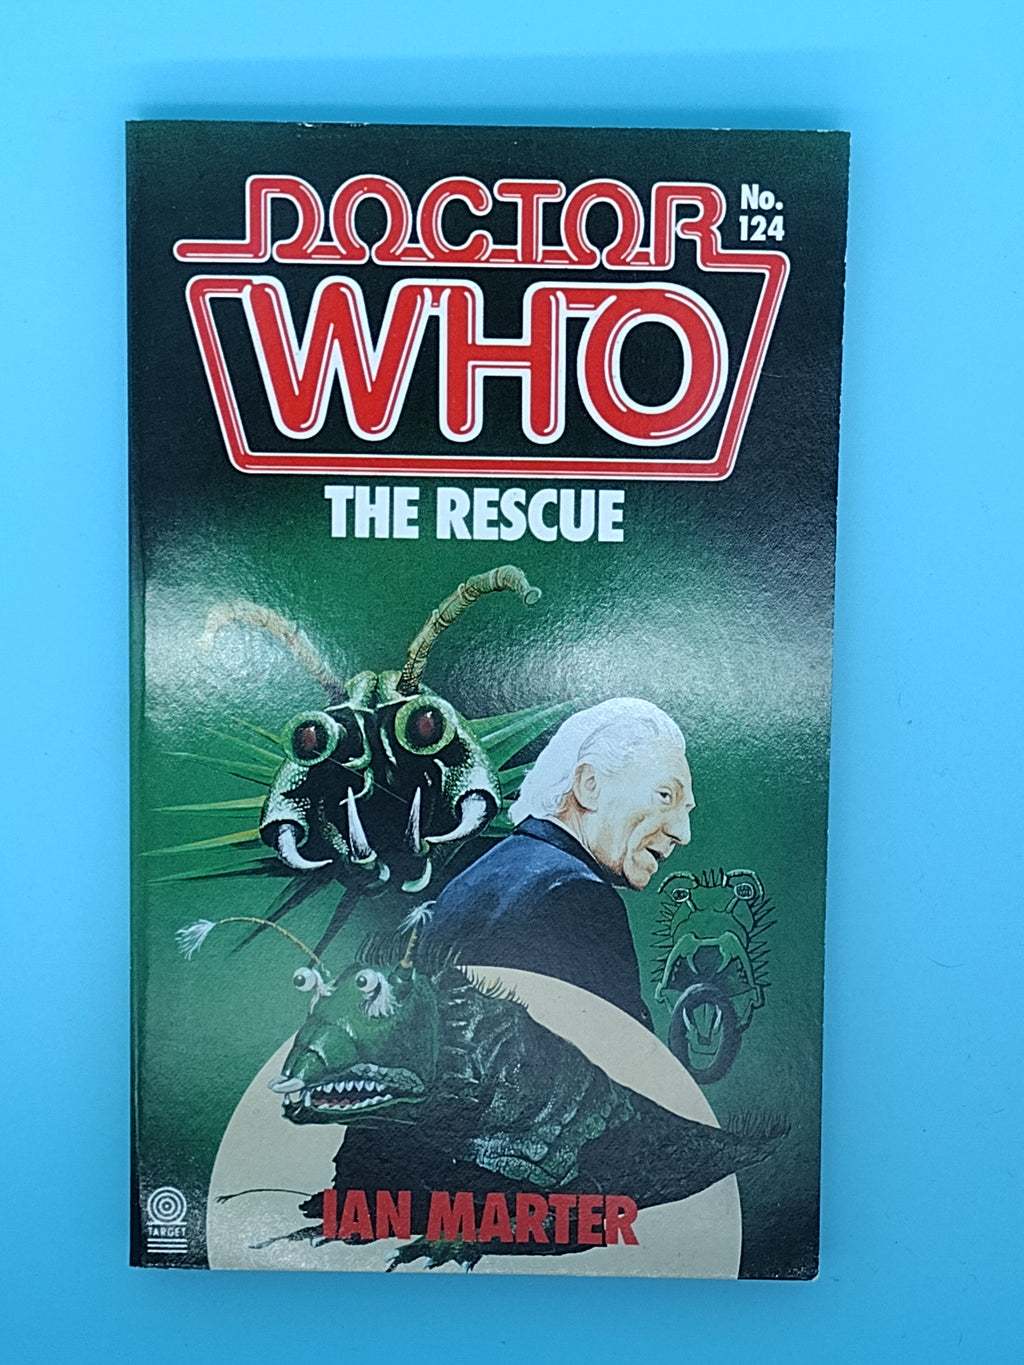 Doctor Who: The Rescue  by Ian Marter